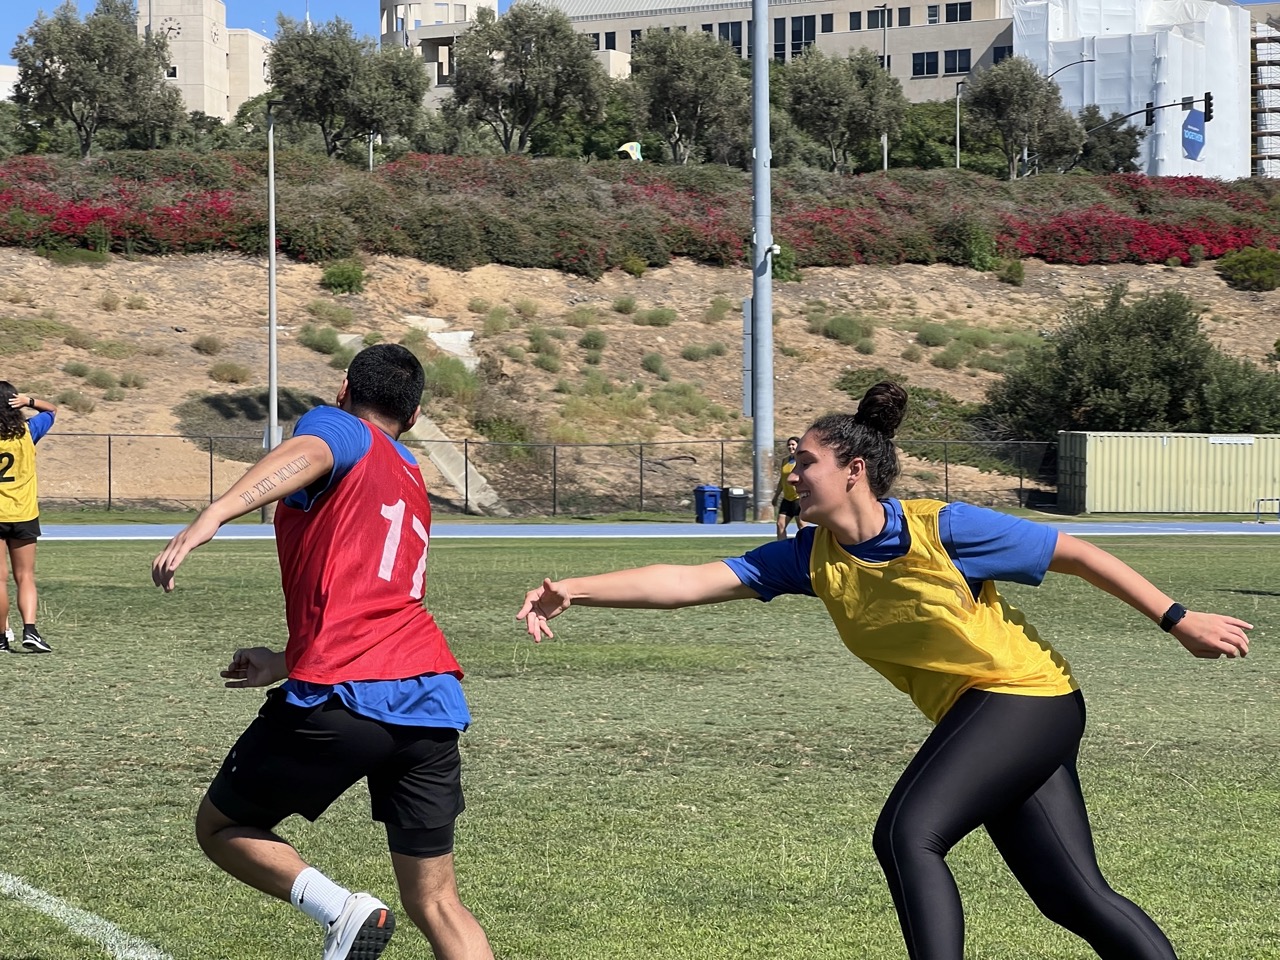 Students Playing Intramural Flag Football